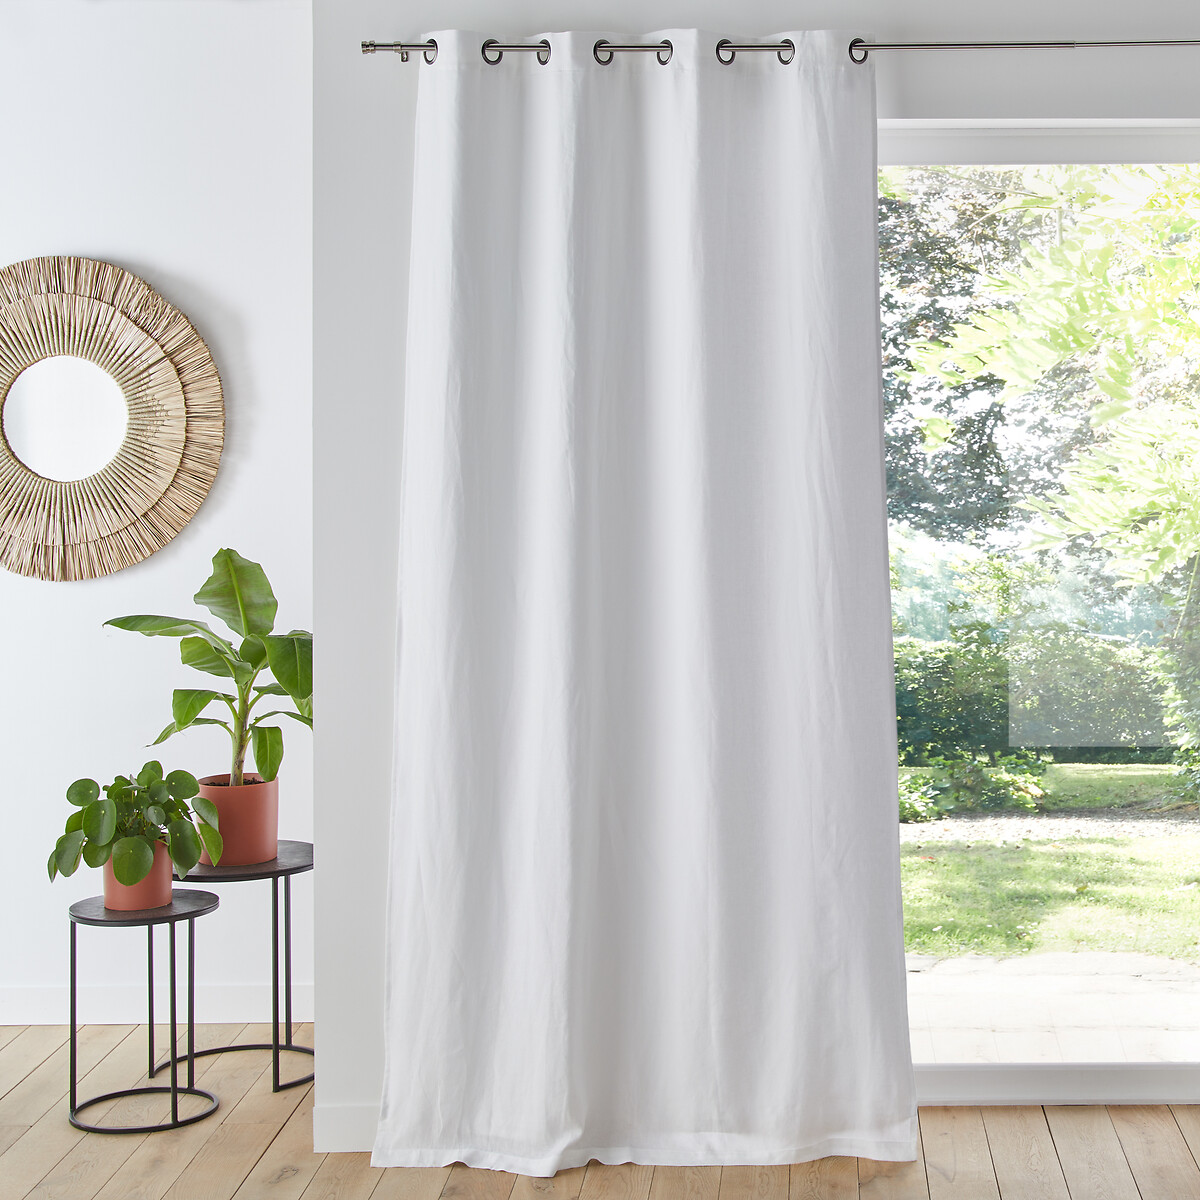 Crate & Barrel Isabela Sheer Curtain Panel in Linen Cotton 50x108 Lot of 2 New! 